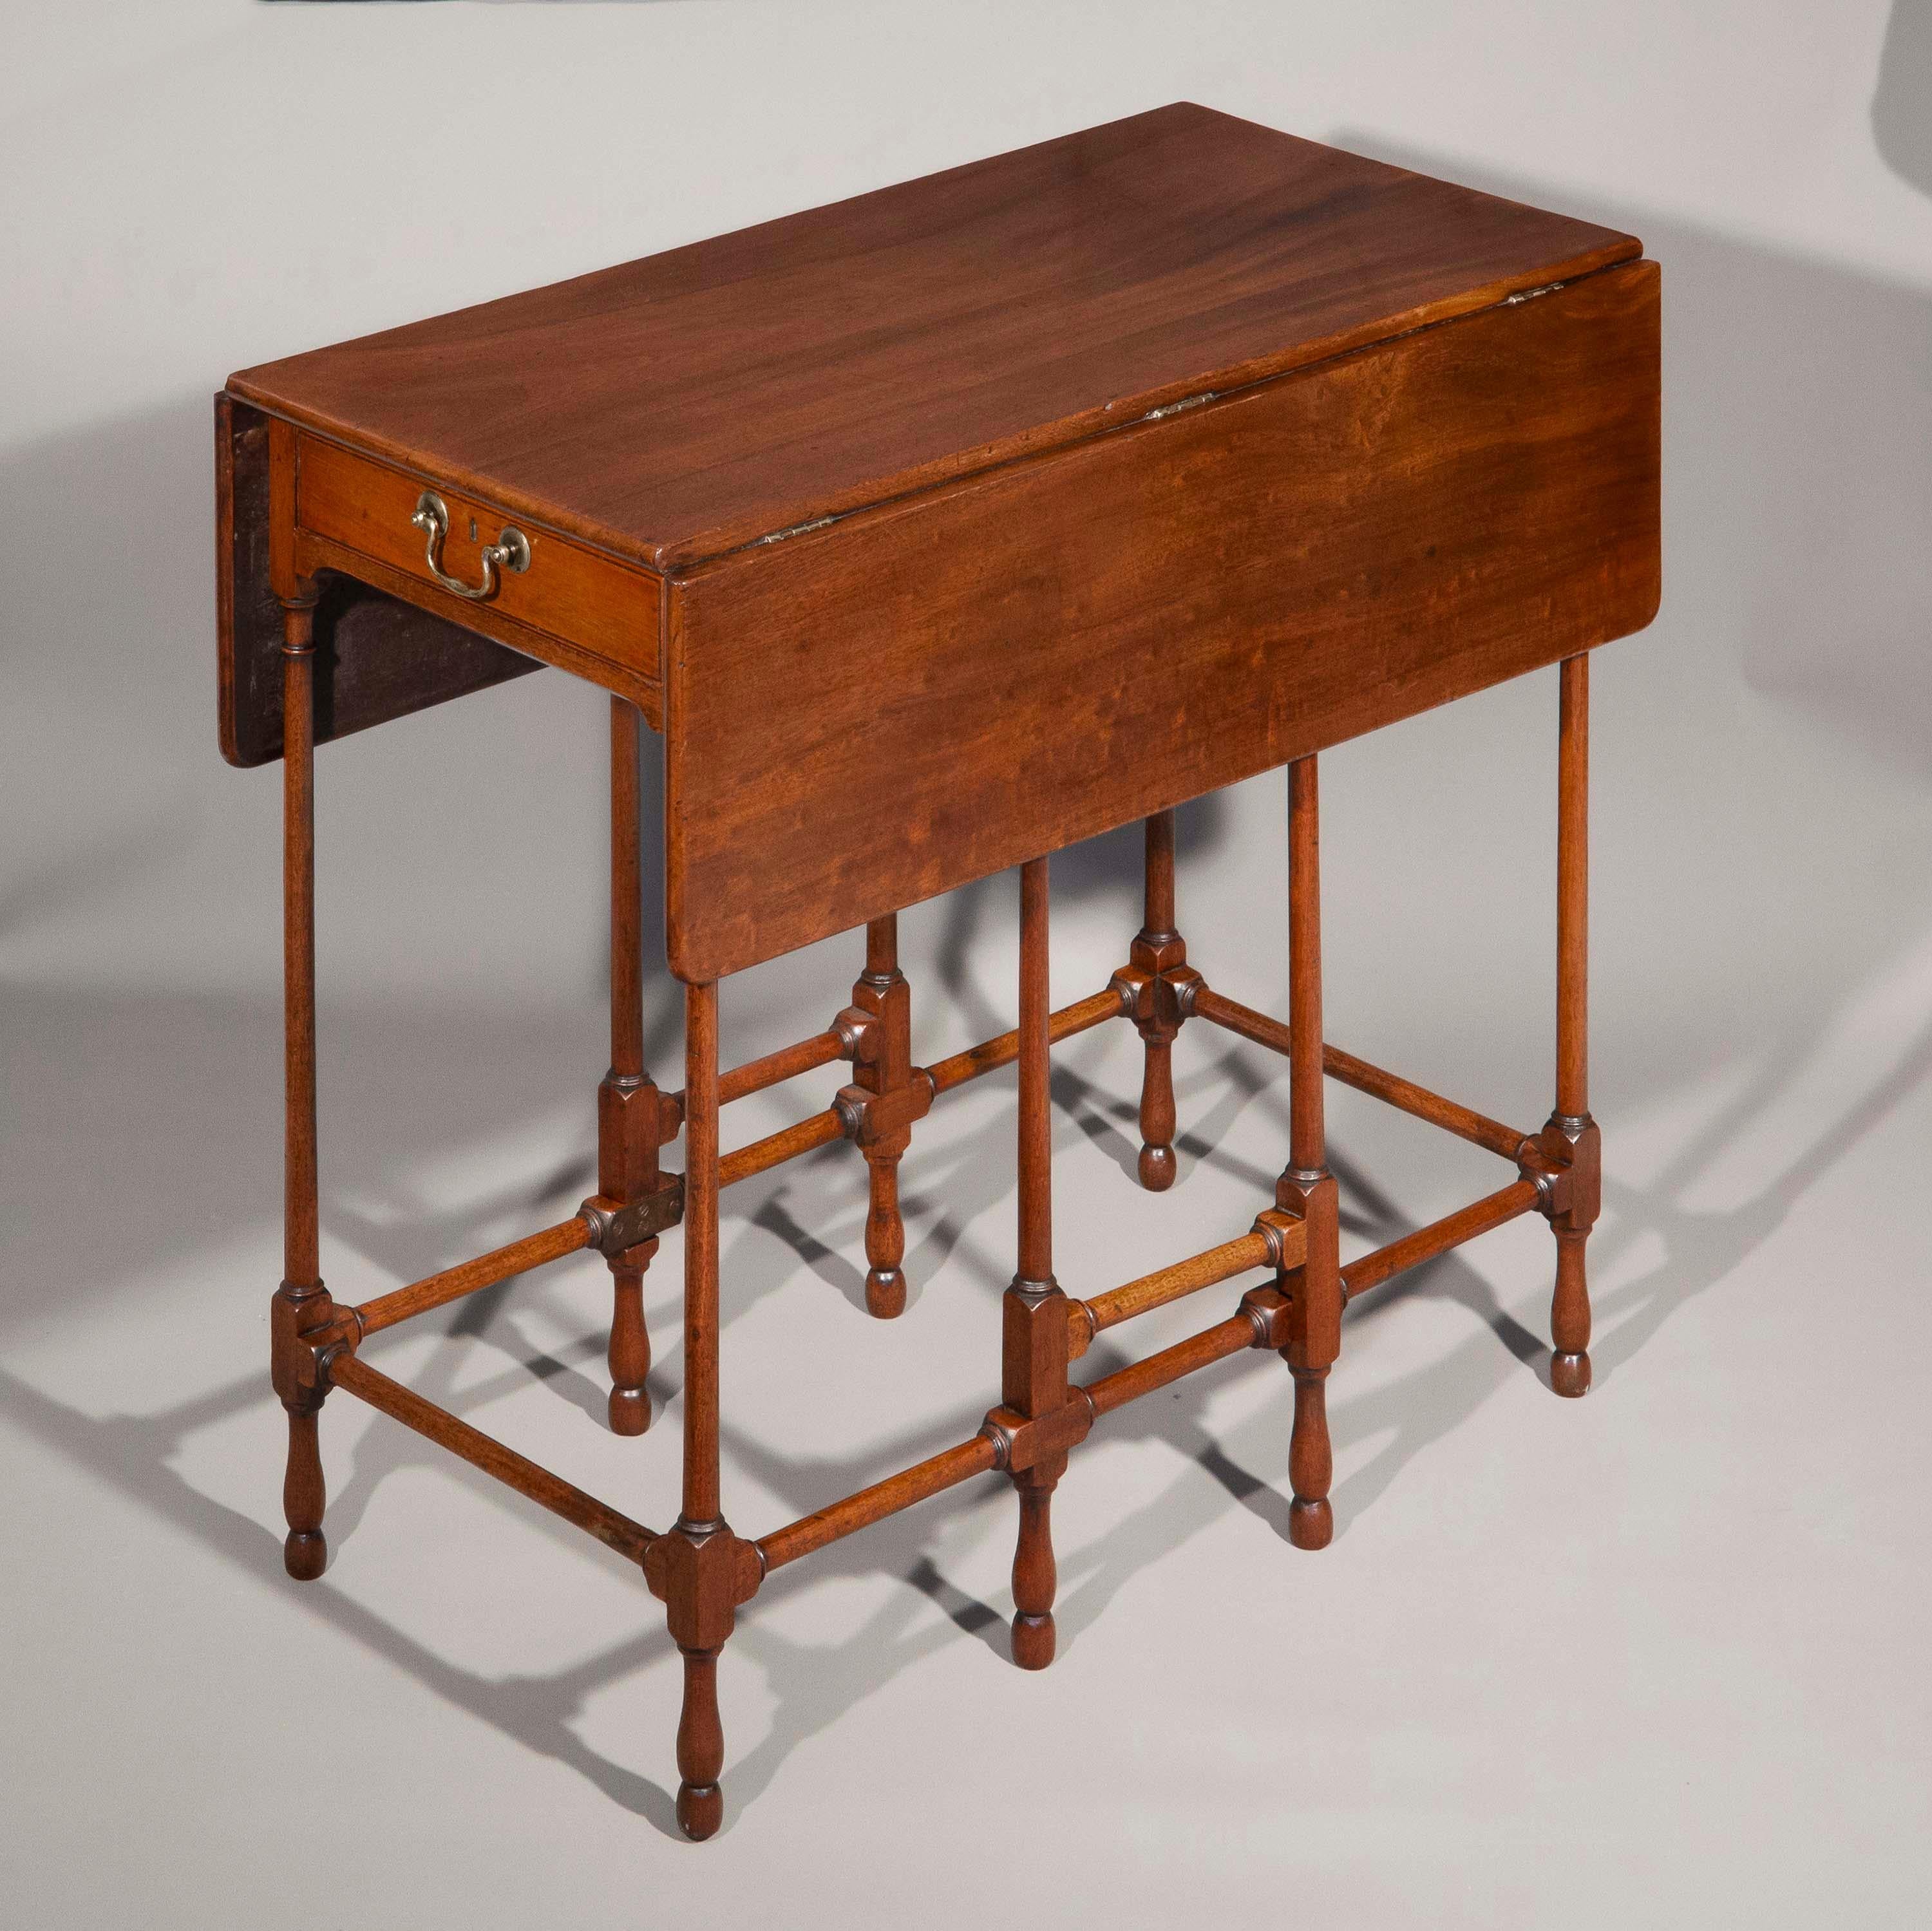 A rare 18th century George III period mahogany 'Spider Leg' side table or drop-leaf table, in the manner of ‘The Dumfries House Cabinet-Maker’.
English or Scottish, circa 1780.

Why we like it
We love the elegant simplicity of this table, the